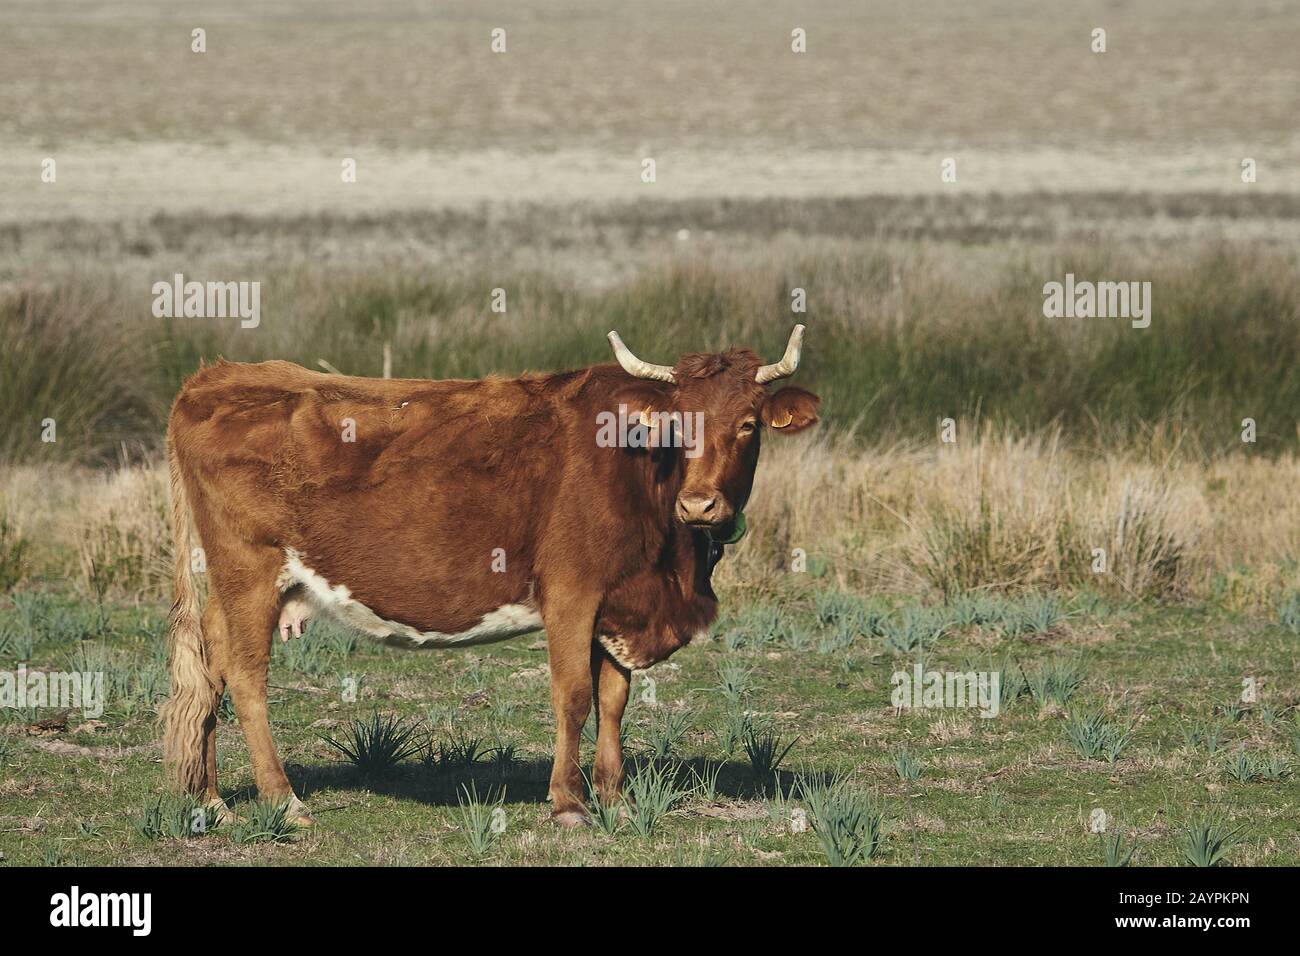 0008 jpg hi-res stock photography and images - Page 7 - Alamy